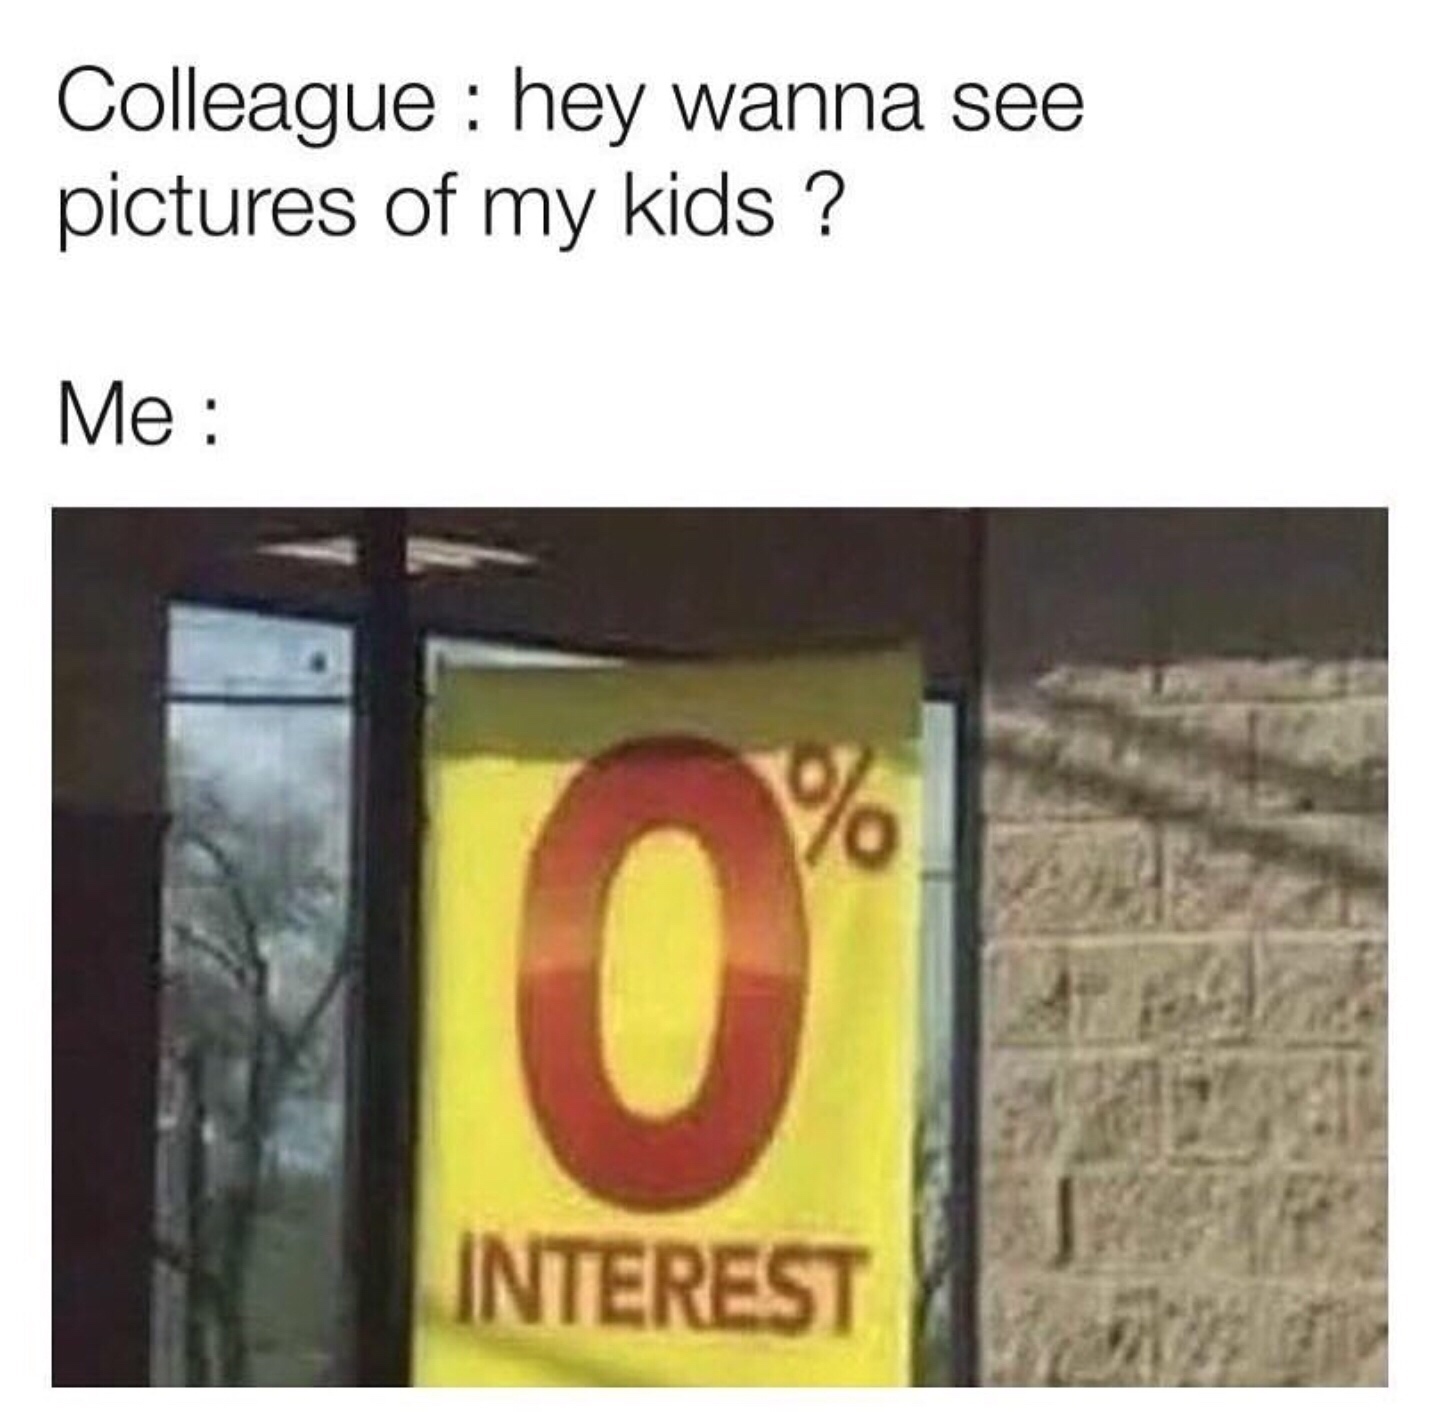 0% interest for 12 months meme - Colleague hey wanna see pictures of my kids ? Me Interest